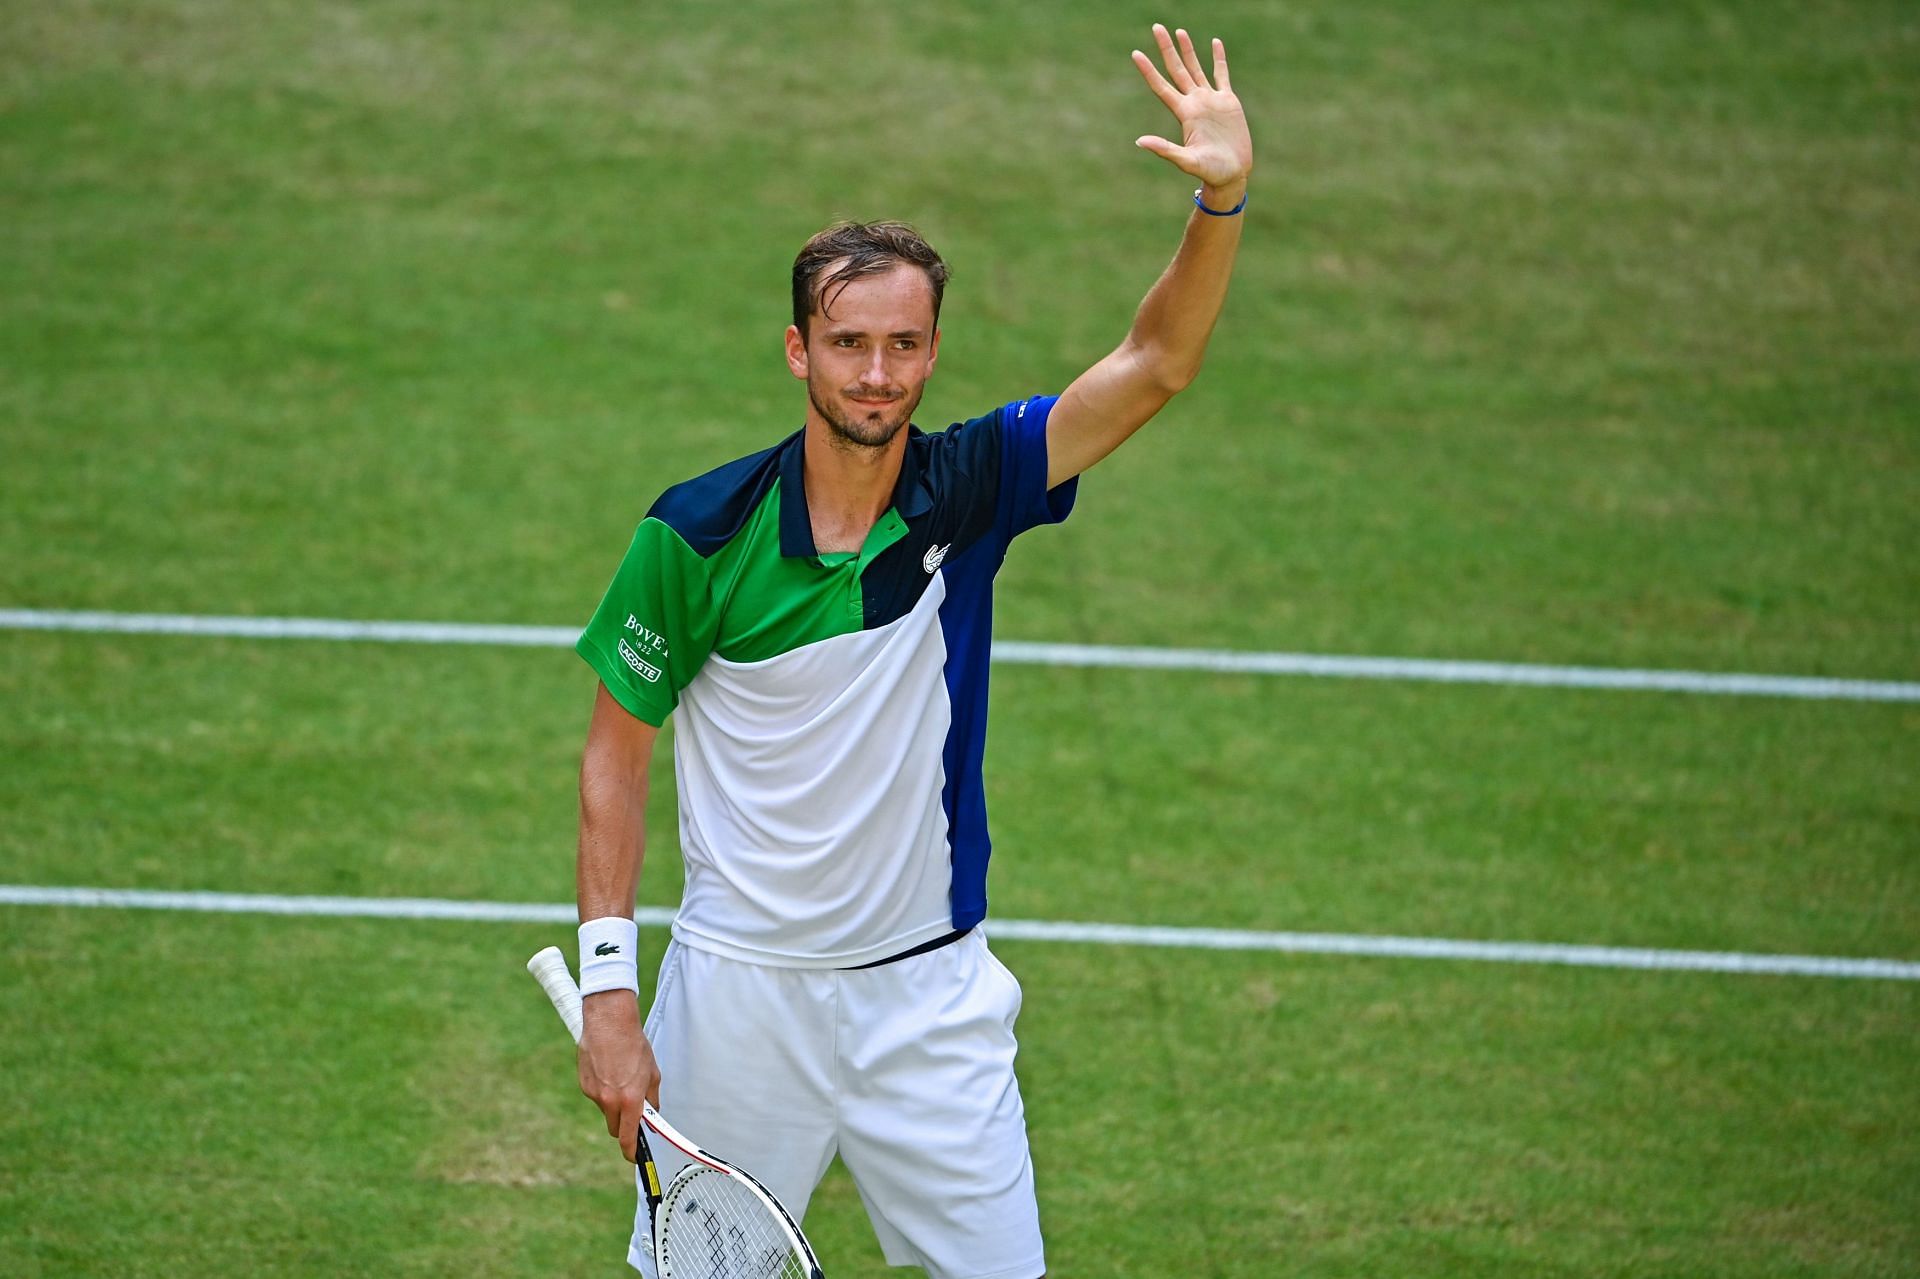 Daniil Medvedev is the top seed and defending champion at the Mallorca Open